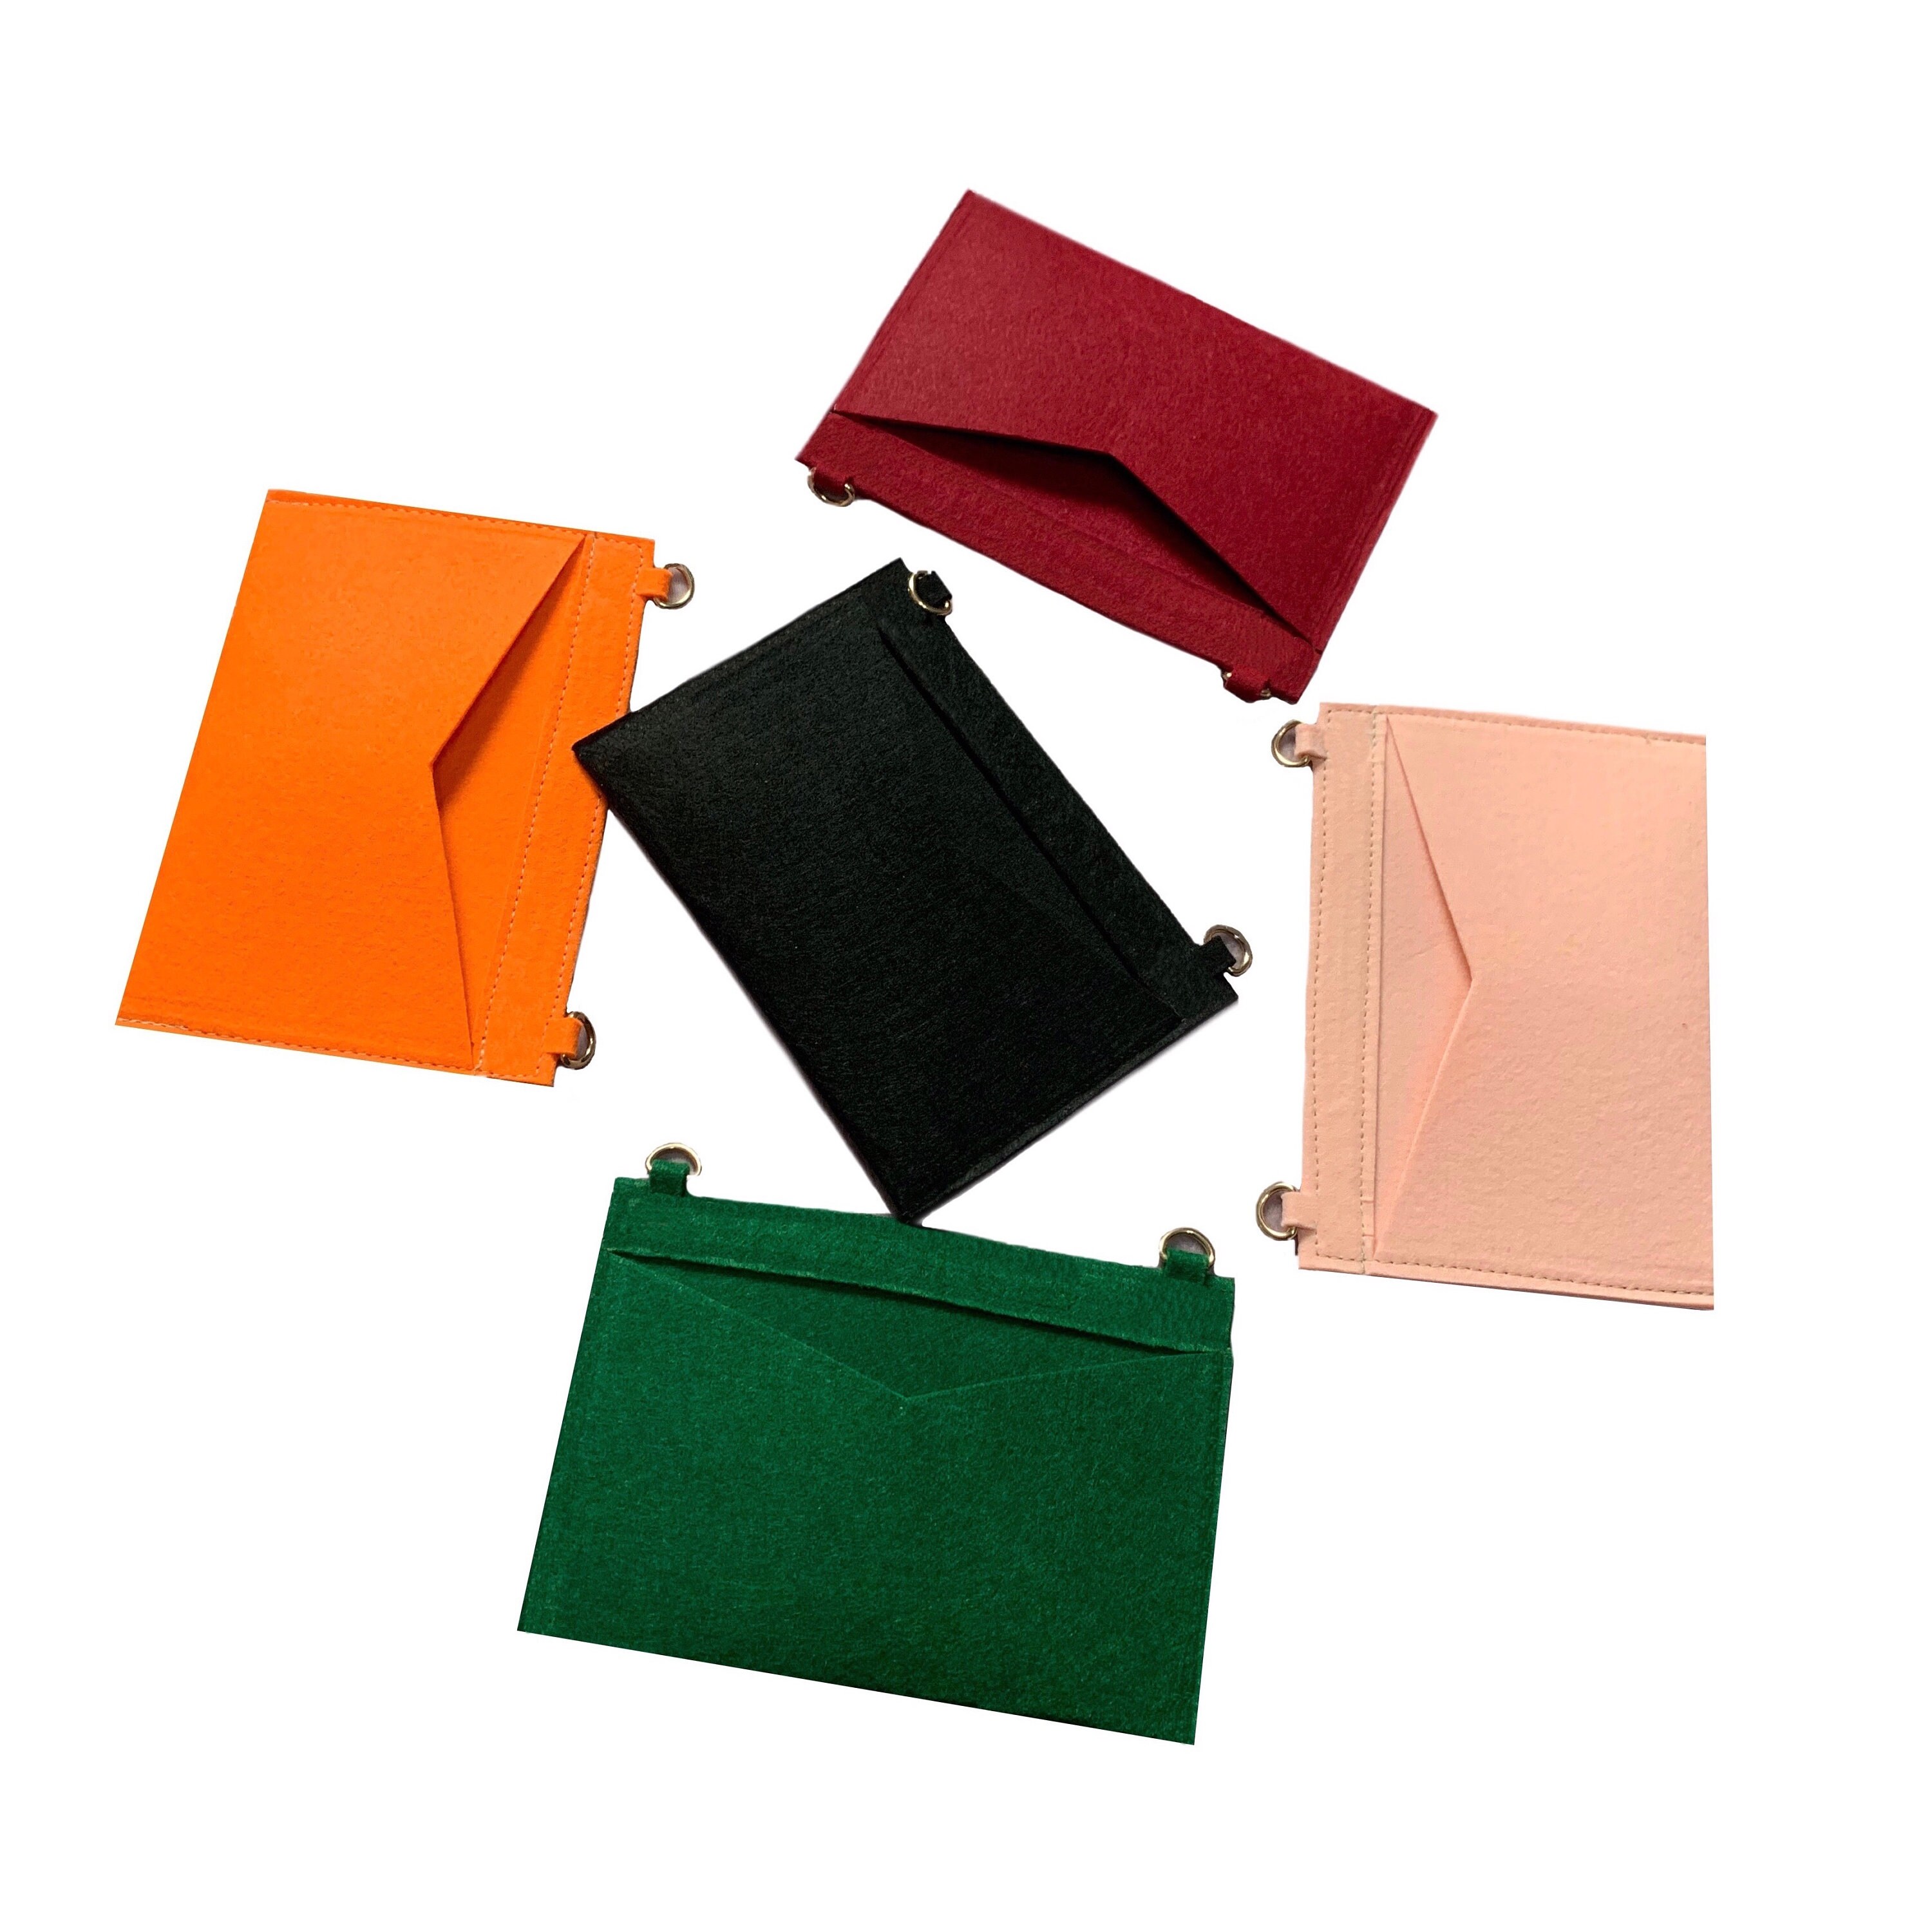 Saddle Card Hold Conversion Kit with Copper Chain/Felt Insert